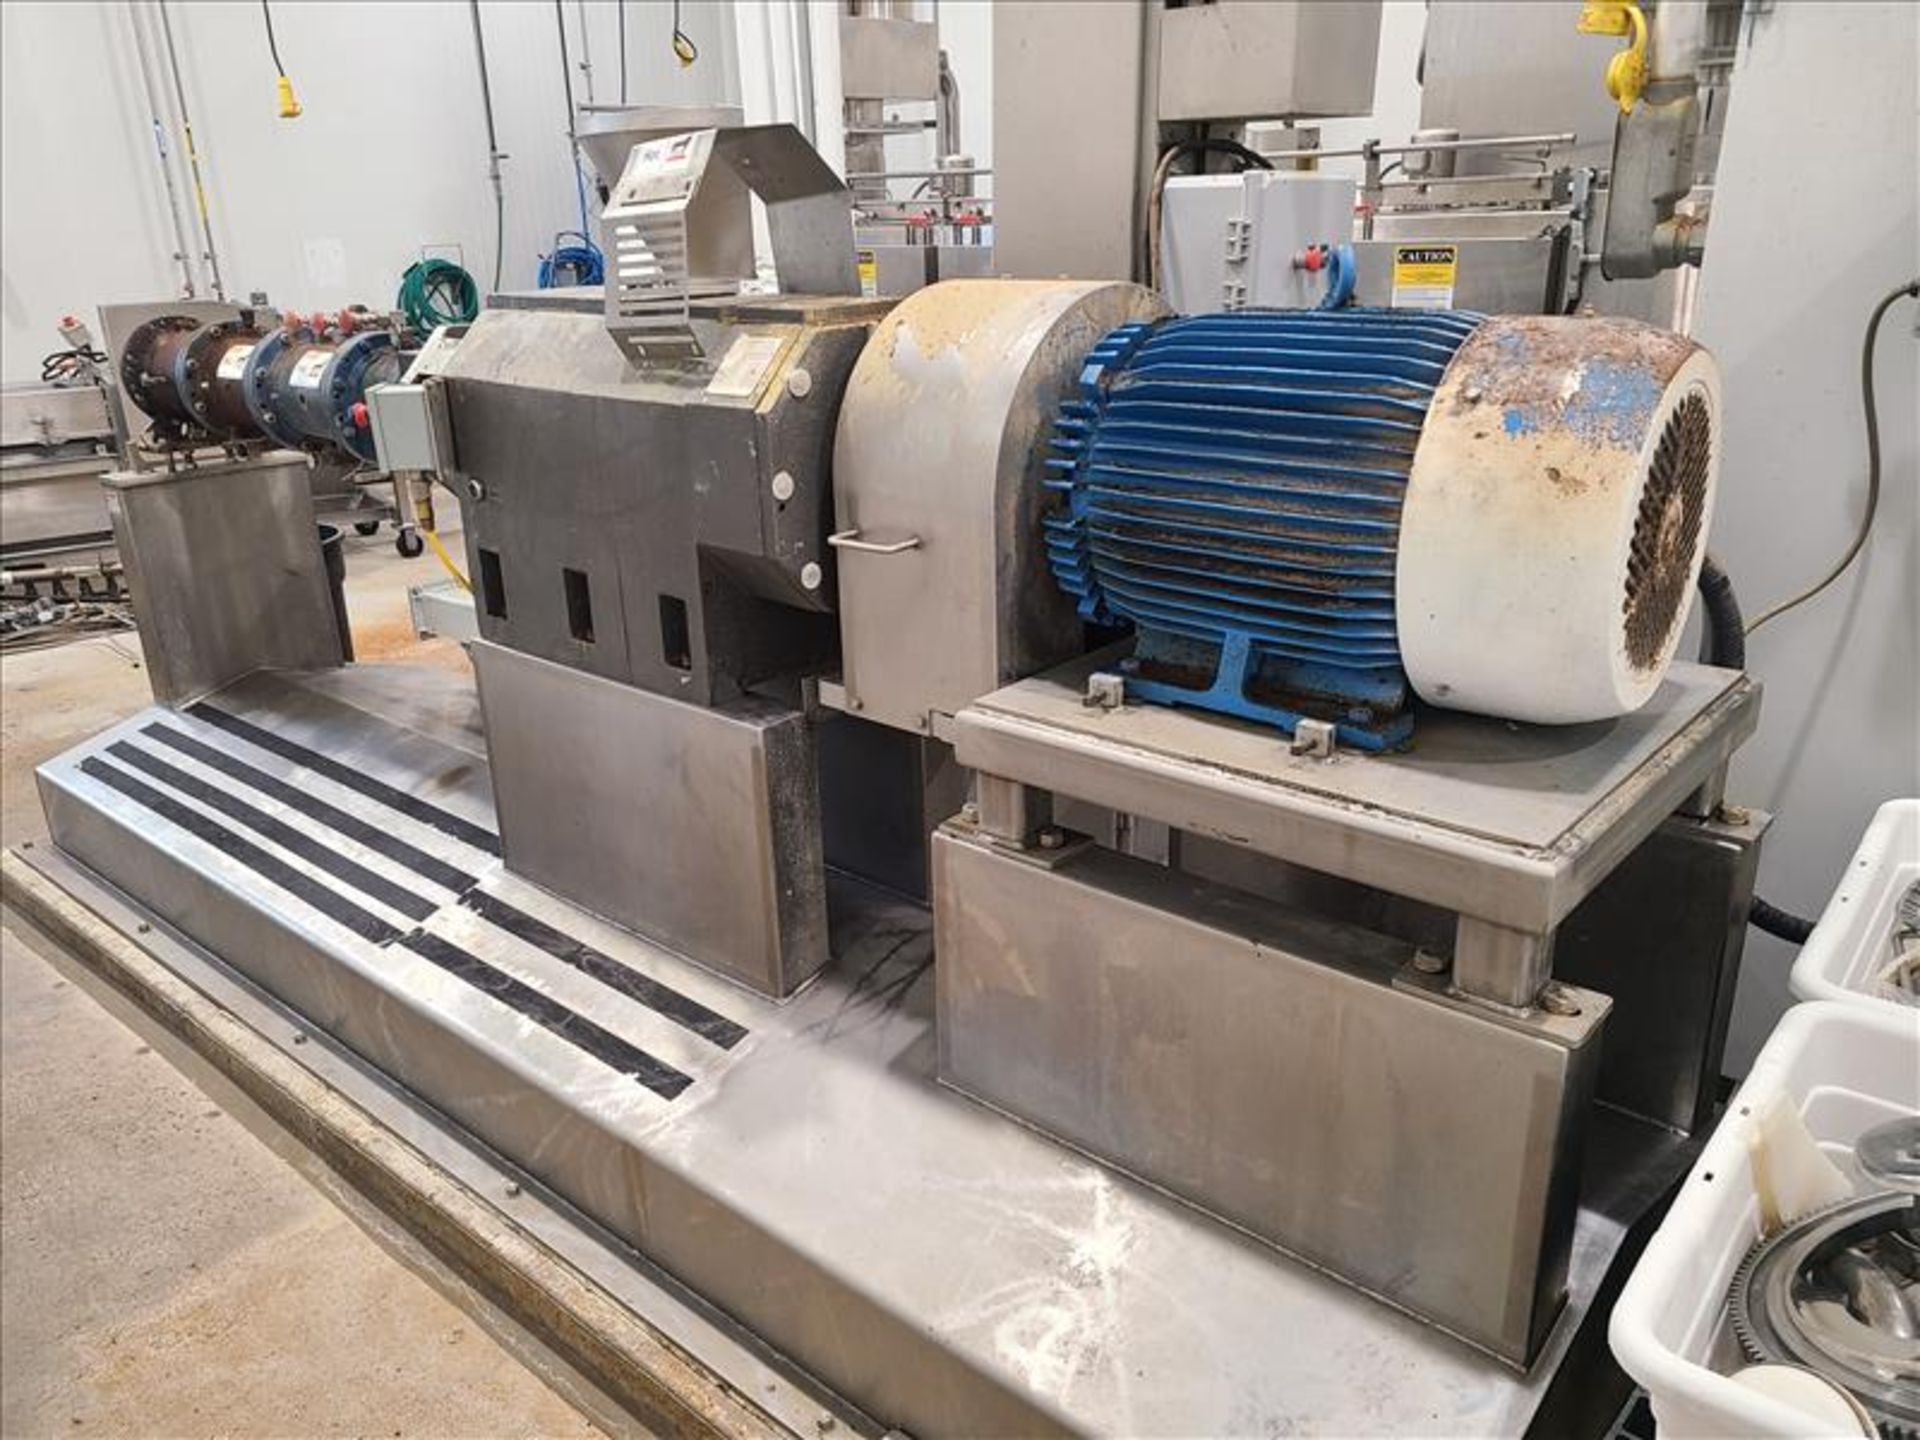 Wenger Twin Screw Extruder, mod. TX57, Magnum ST, ser. no. 12817-1, 16, 404 hours, 40 hp, 575 volts - Image 2 of 11